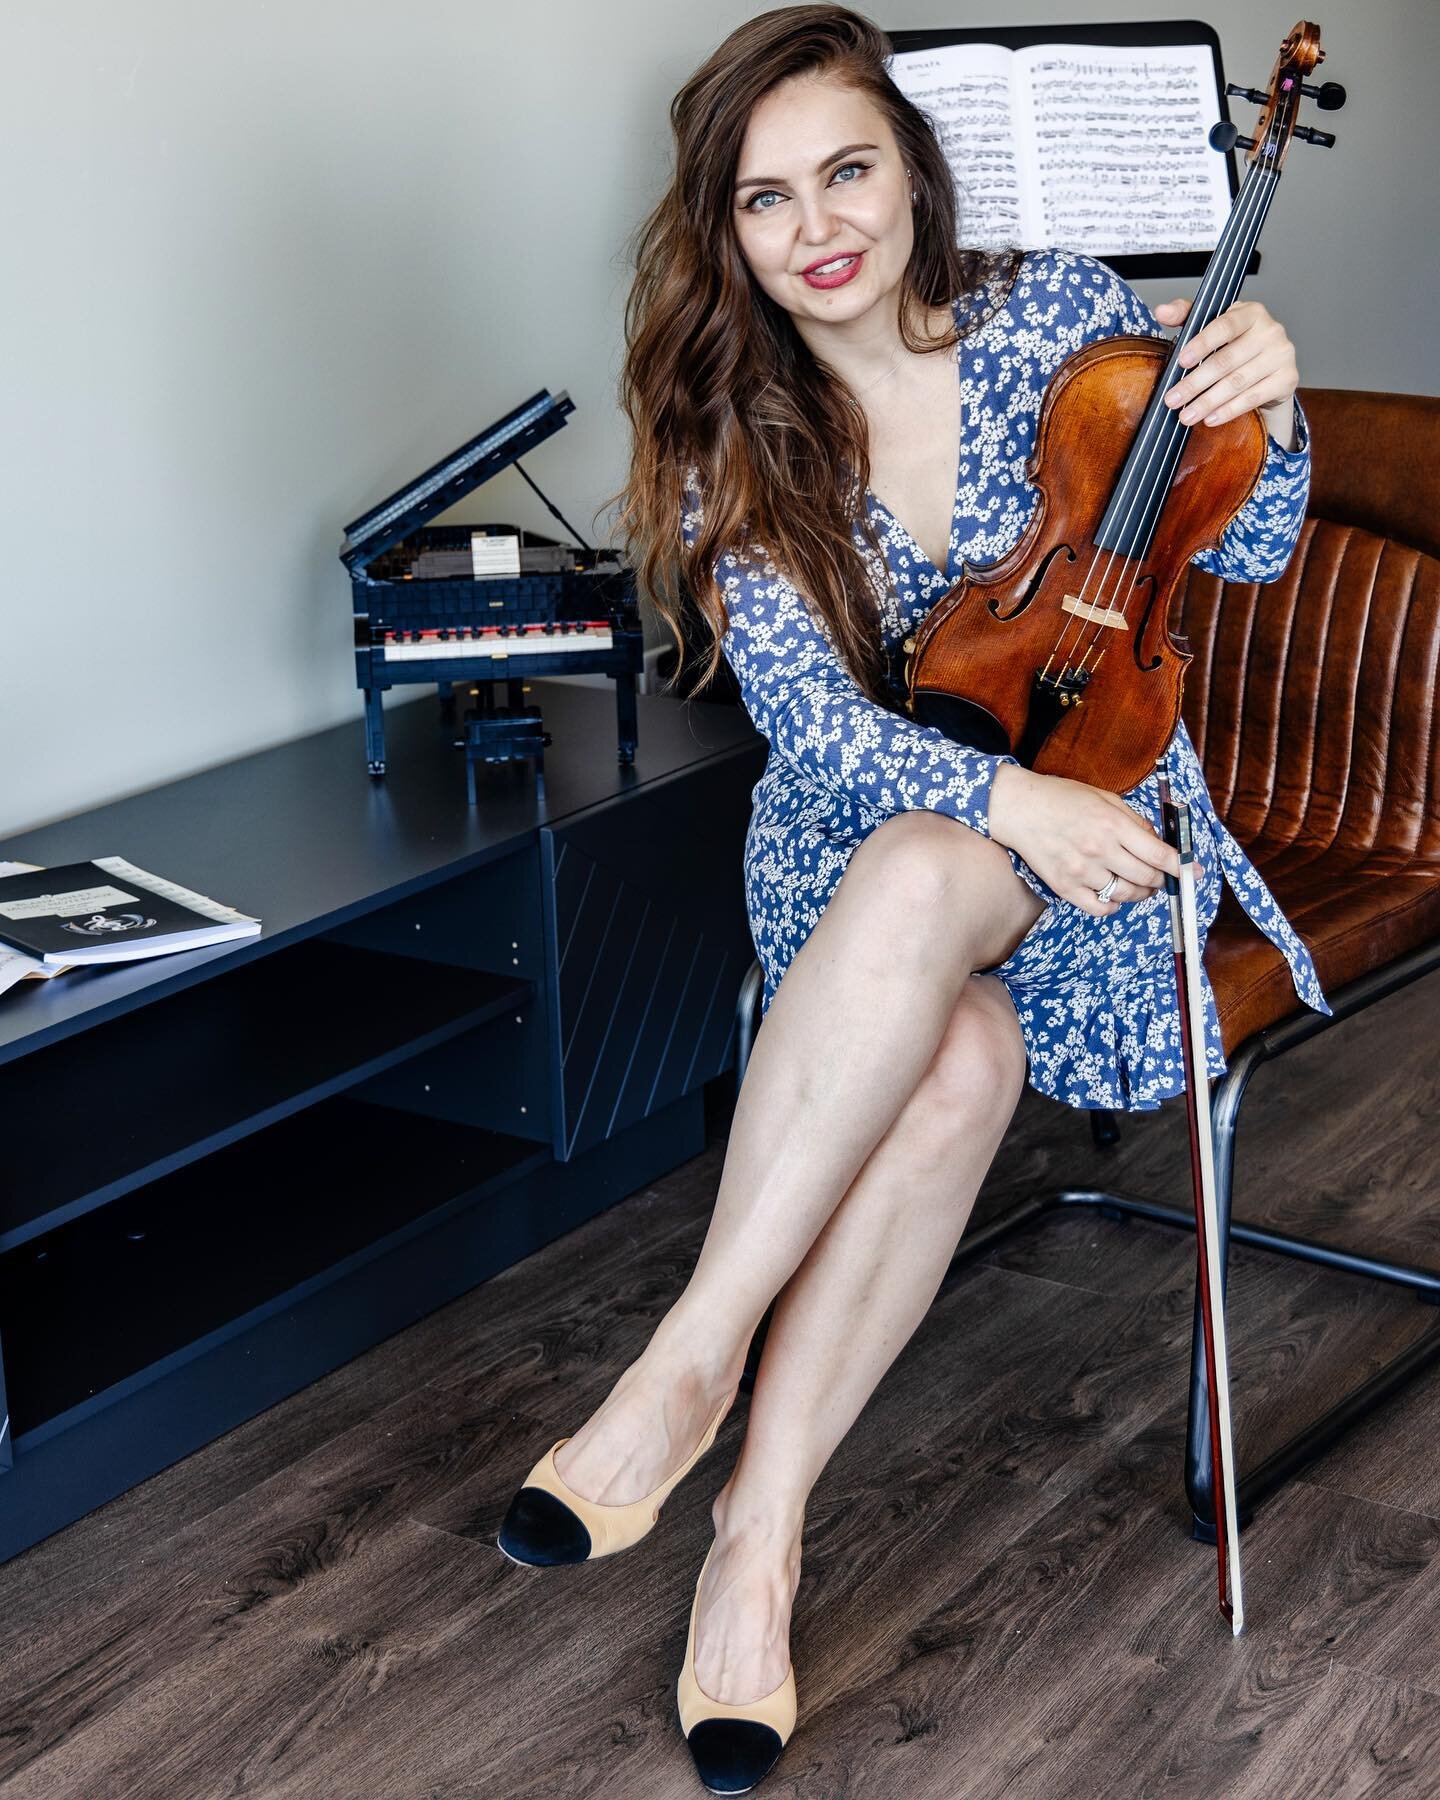 Our goal is to deliver the finest violin, piano and viola lessons and to provide students the opportunity to learn in a stress-free environment.

Here is our Master Instructor, Sevilya Hendrickx - we are excited to have her teach our students, with h